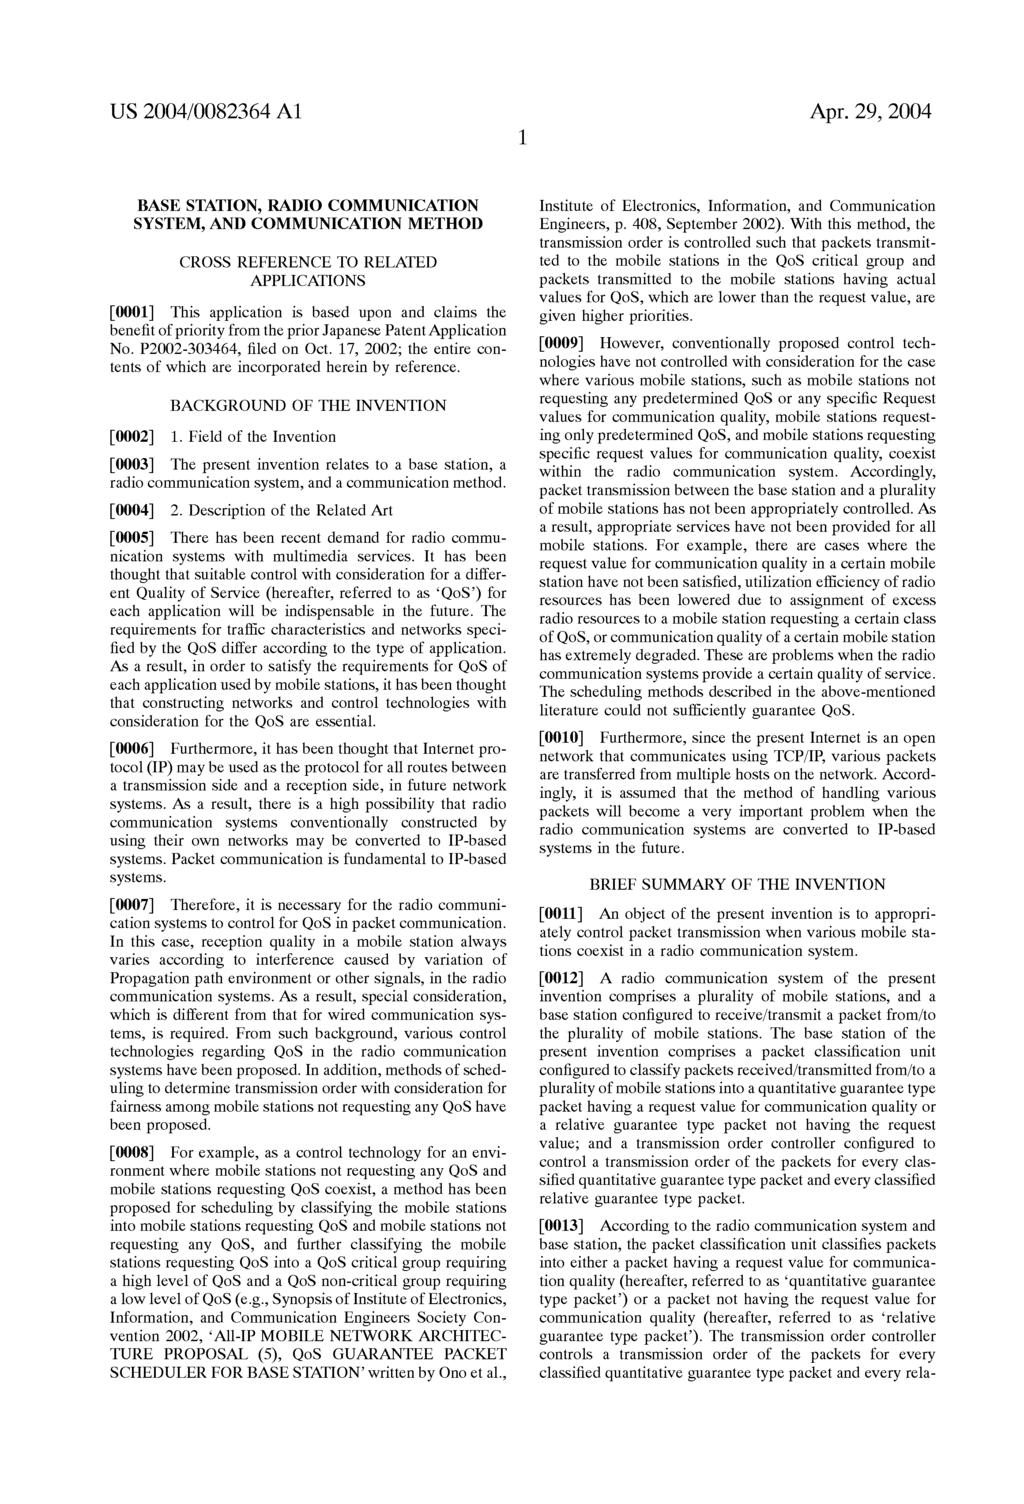 US 2004/0082364 A1 Apr. 29, 2004 BASE STATION, RADIO COMMUNICATION SYSTEM, AND COMMUNICATION METHOD CROSS REFERENCE TO RELATED APPLICATIONS 0001.